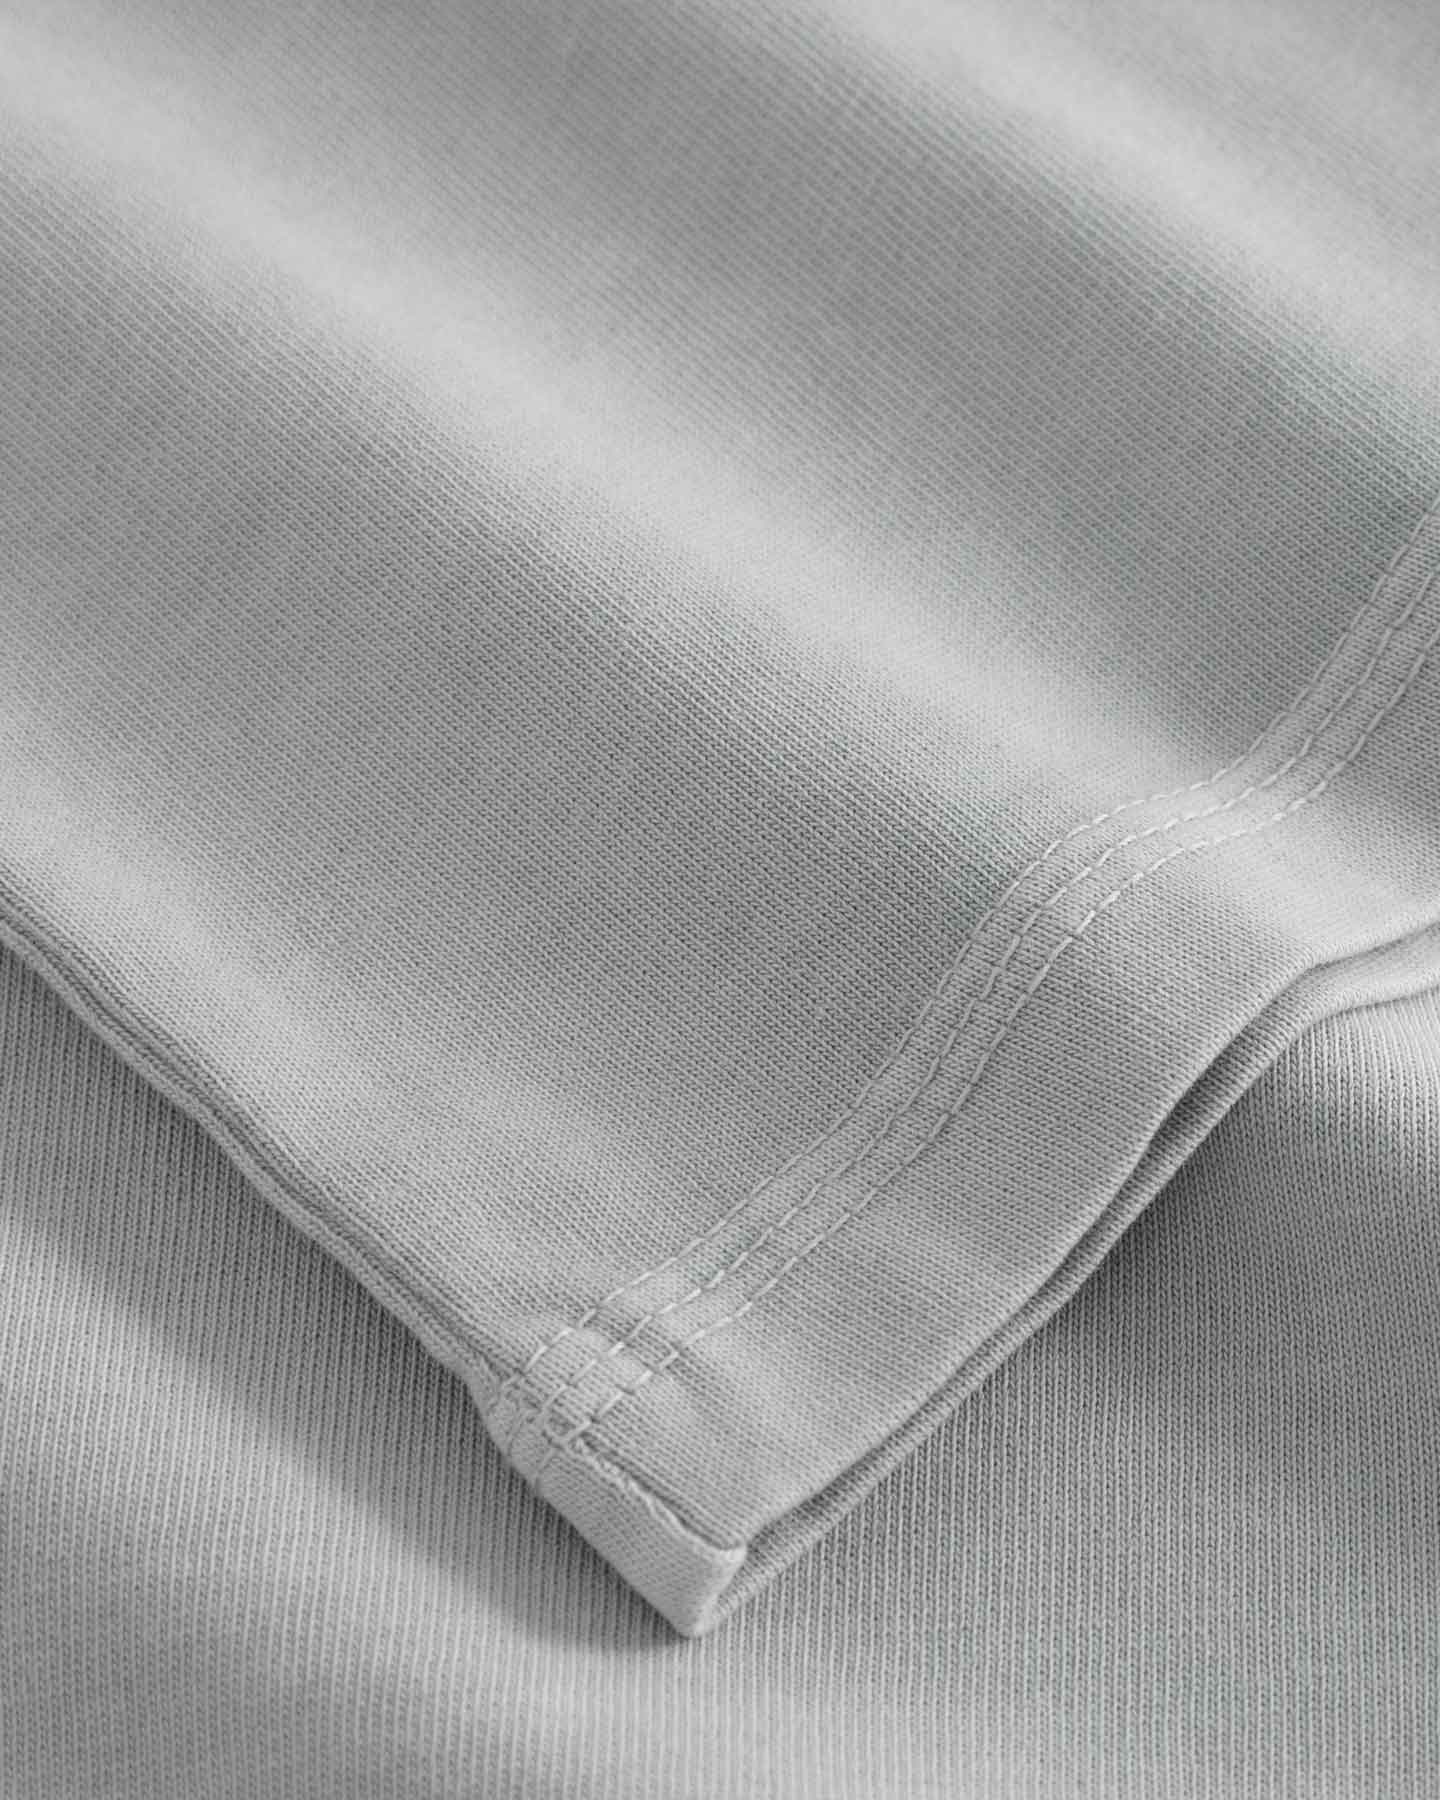 Close-up of sleeve and stitching on washed grey T-shirt